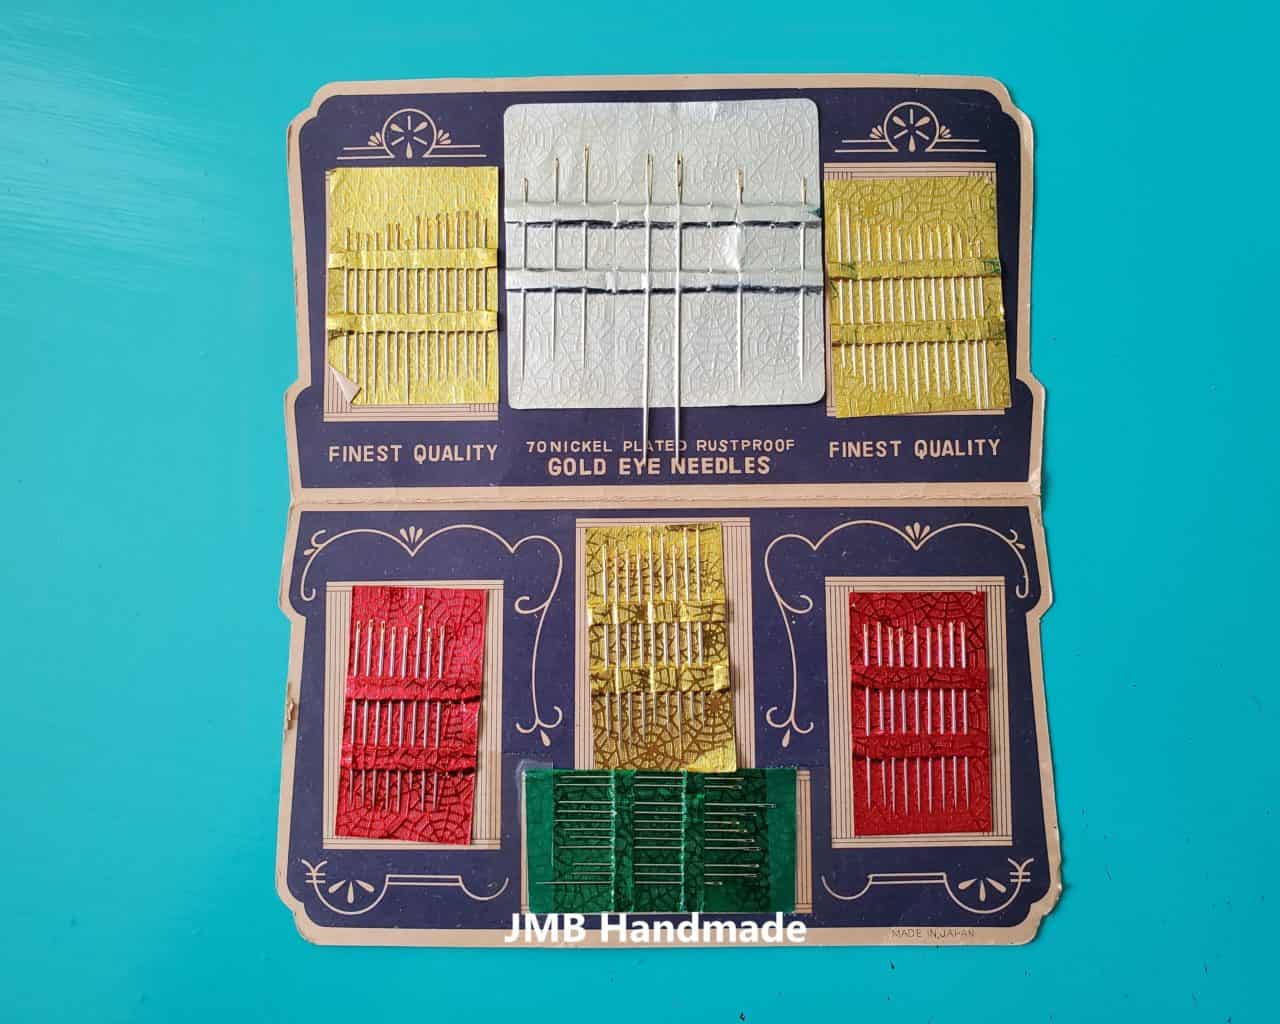 Add hand sewing needles to your sewing studio supplies